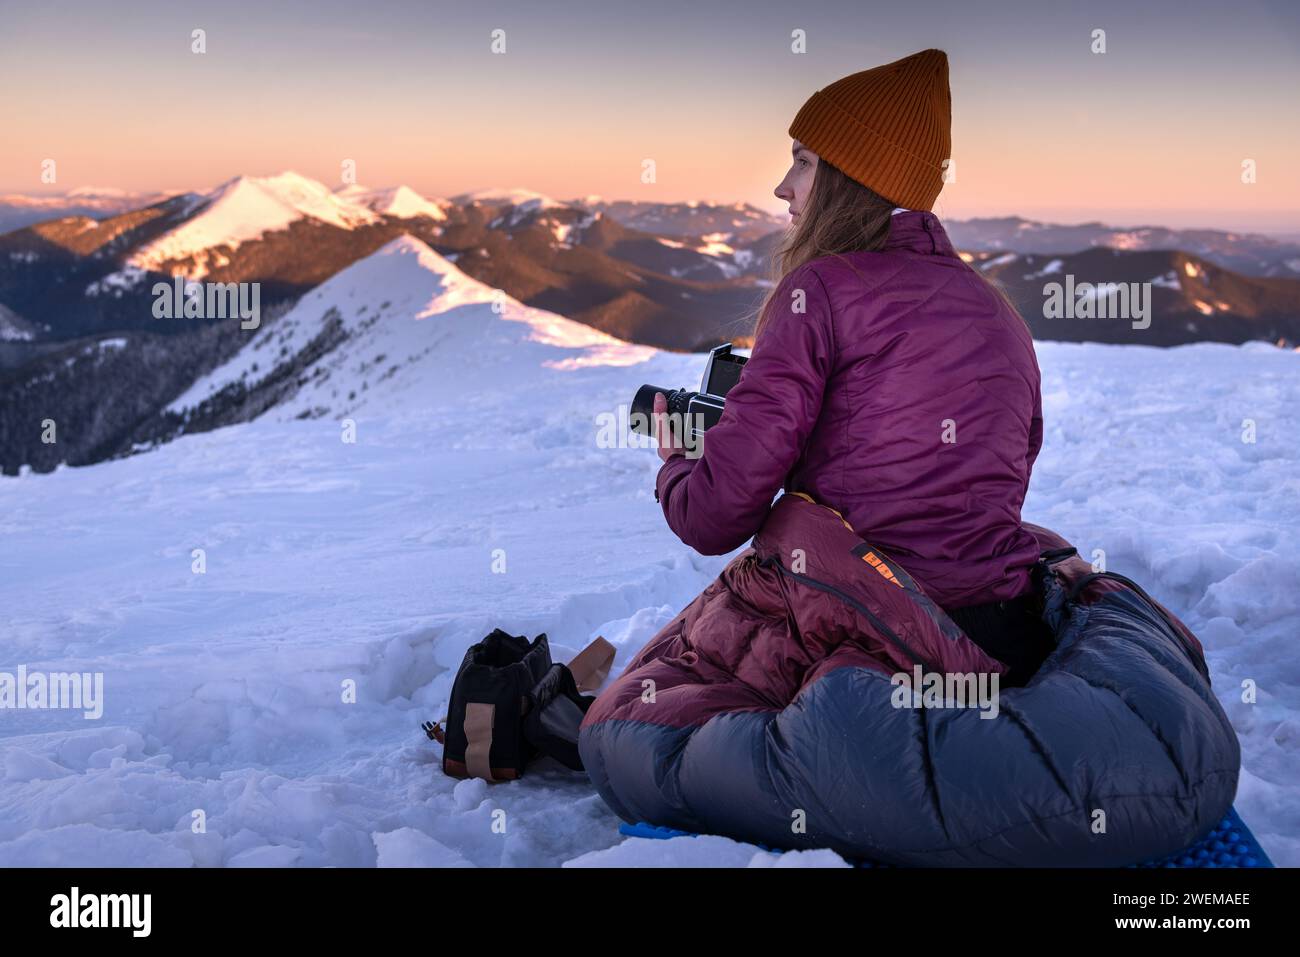 Woman Photographing on Hasselblad sunrise in Winter Mountains Stock Photo